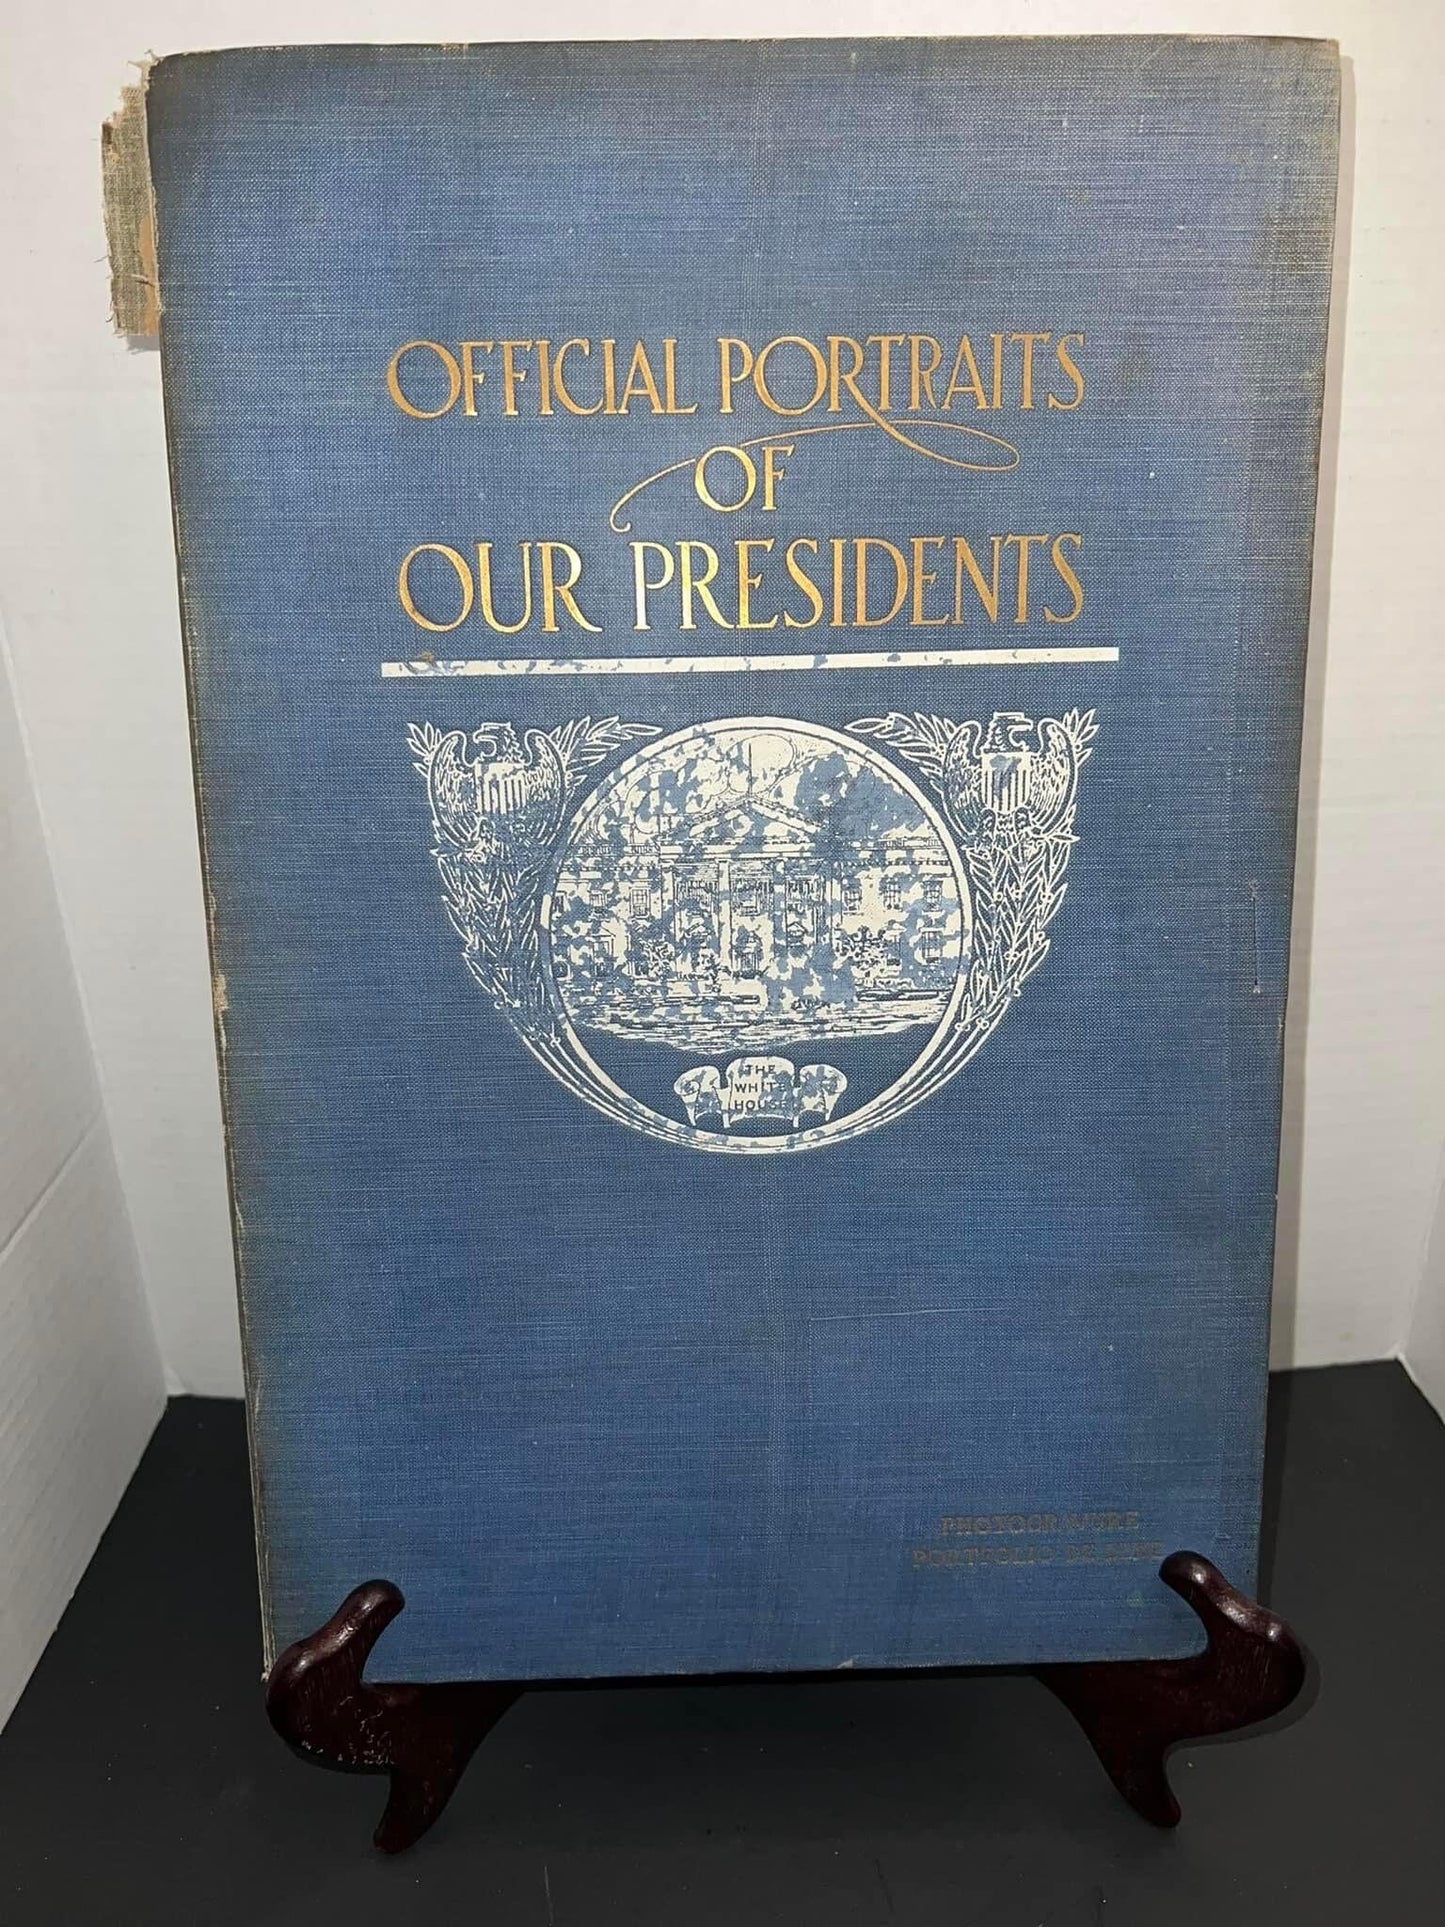 Antique 1912 the White House gallery of official portraits of the president’s Photogravures- Washington to Taft 26 portraits